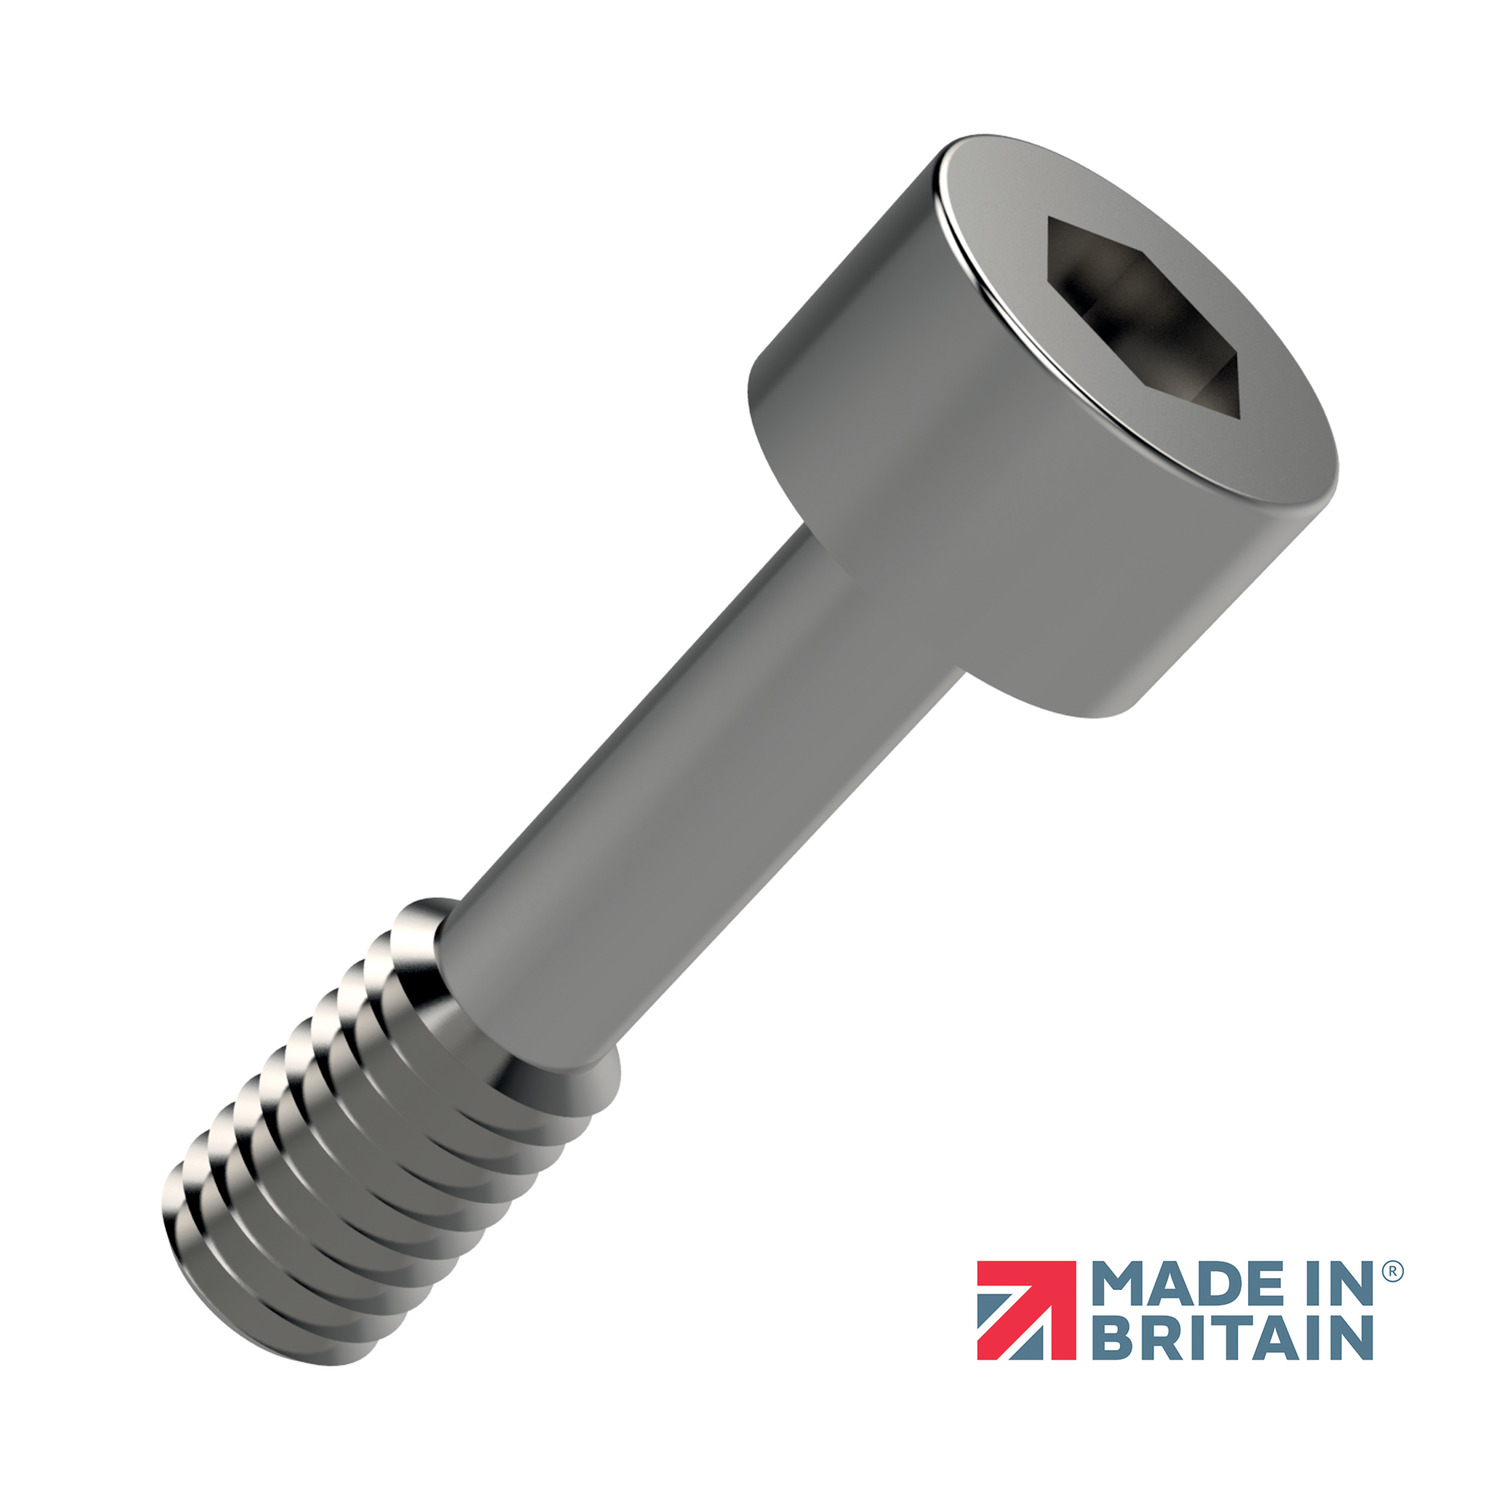 Captive Screws - Cap Head A captive screw with cap head generally to DIN 912. Also available on request in steel (anodised, black oxide or zinc plated), stainless steel (A4, AISI 316), brass or aluminium.